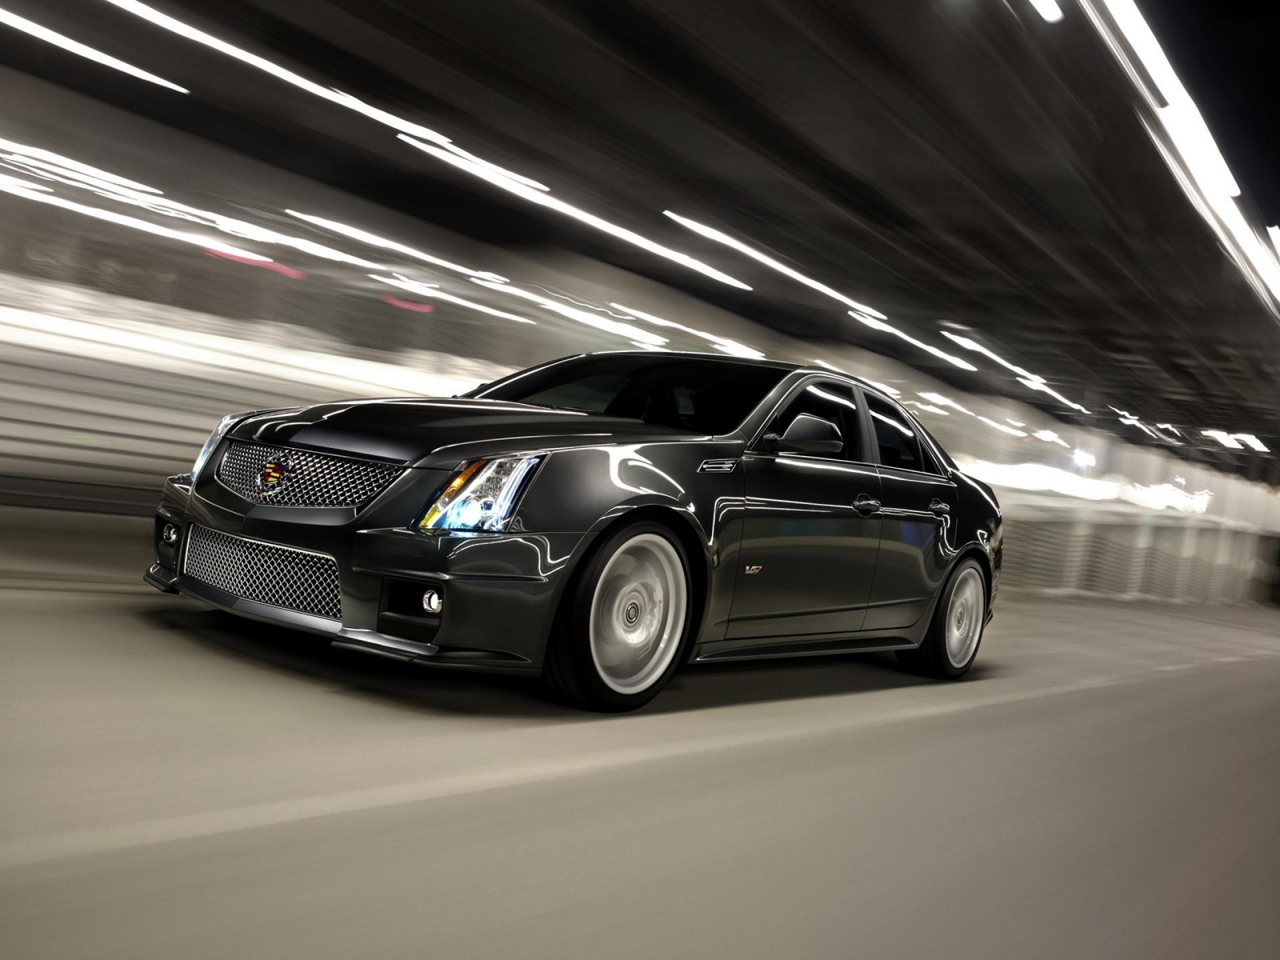 Cadillac CTS 2013 for 1280 x 960 resolution